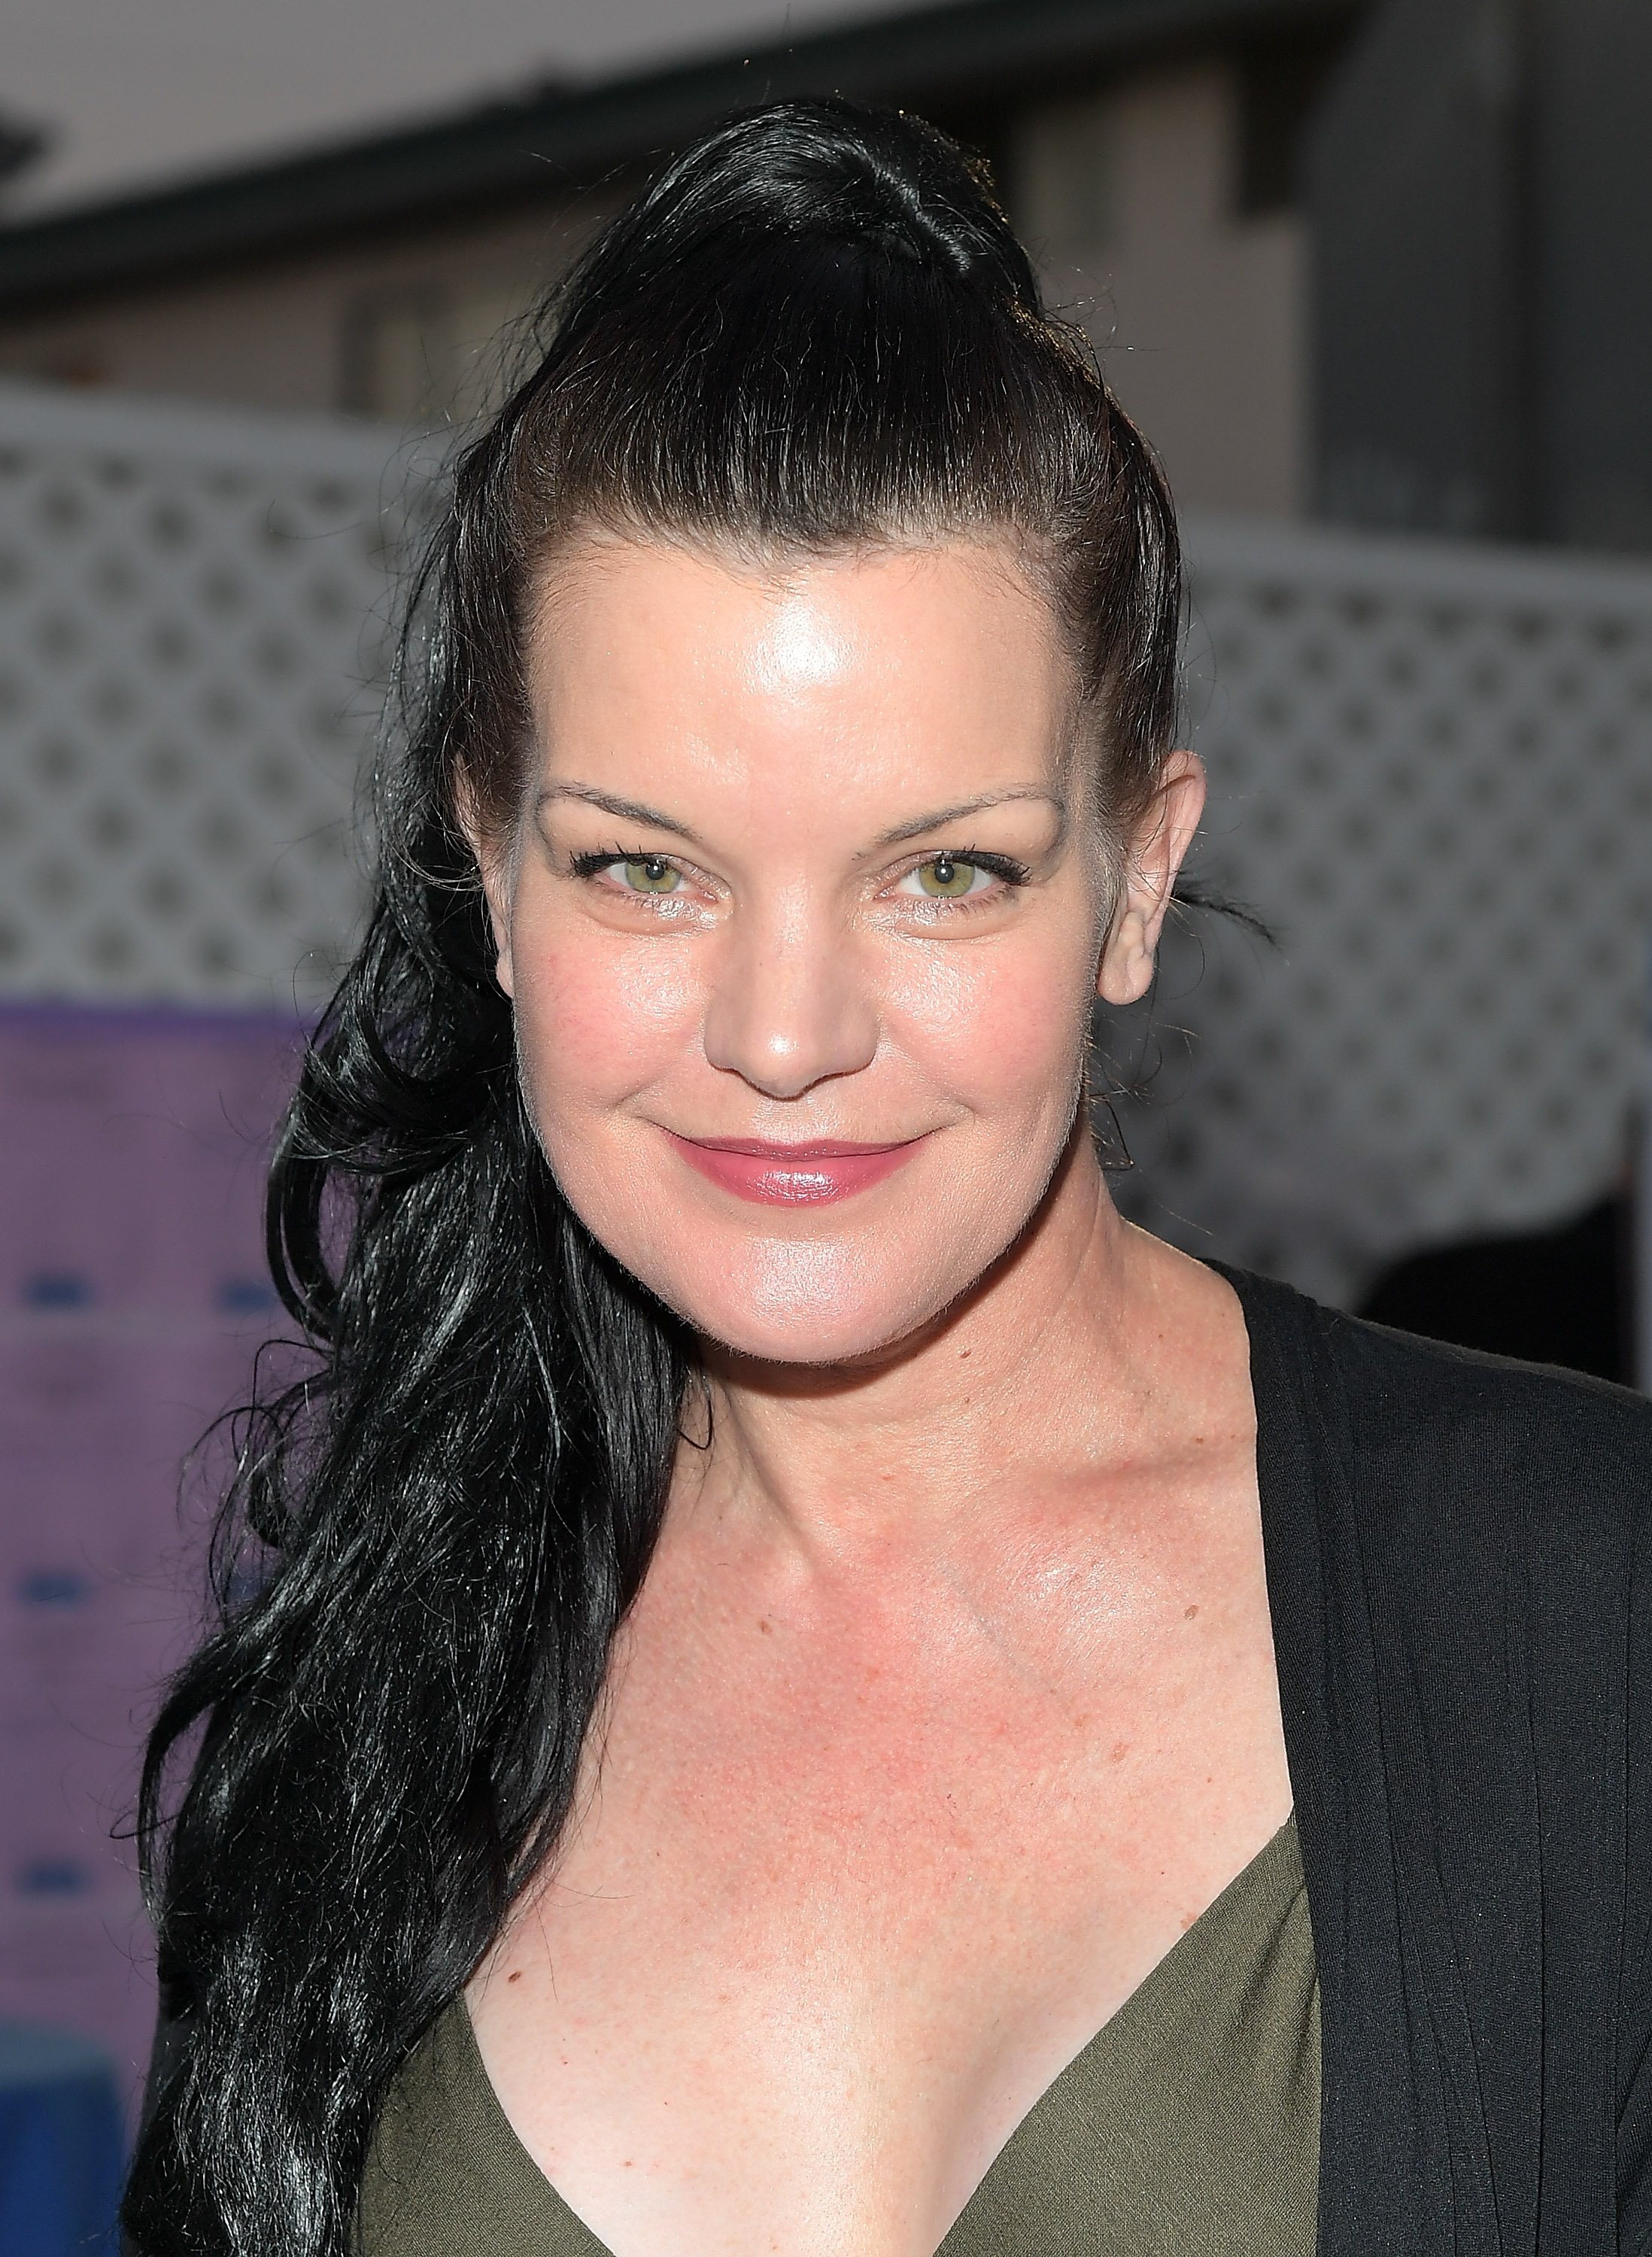 Pauley Perrette attended Project Angel Food's 2018 Angel Awards in Hollywood, California, on August 18, 2018. | Source: Getty Images